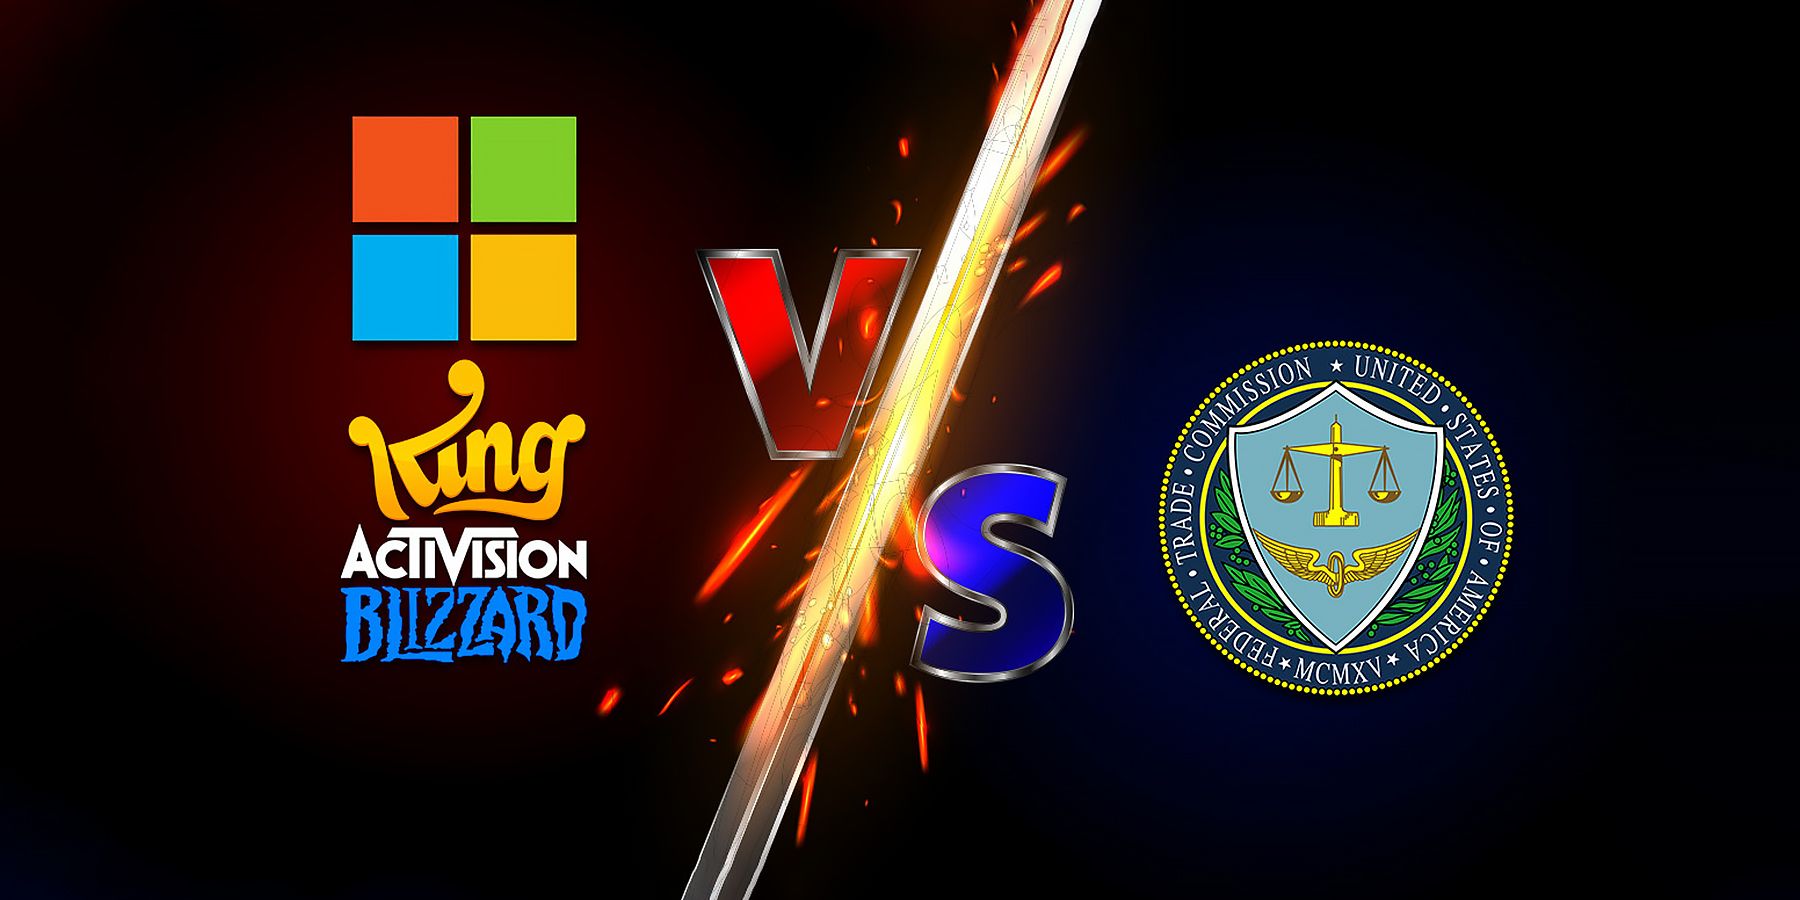 Microsoft Activision Blizzard King vs Federal Trade Commission FTC logo submarks